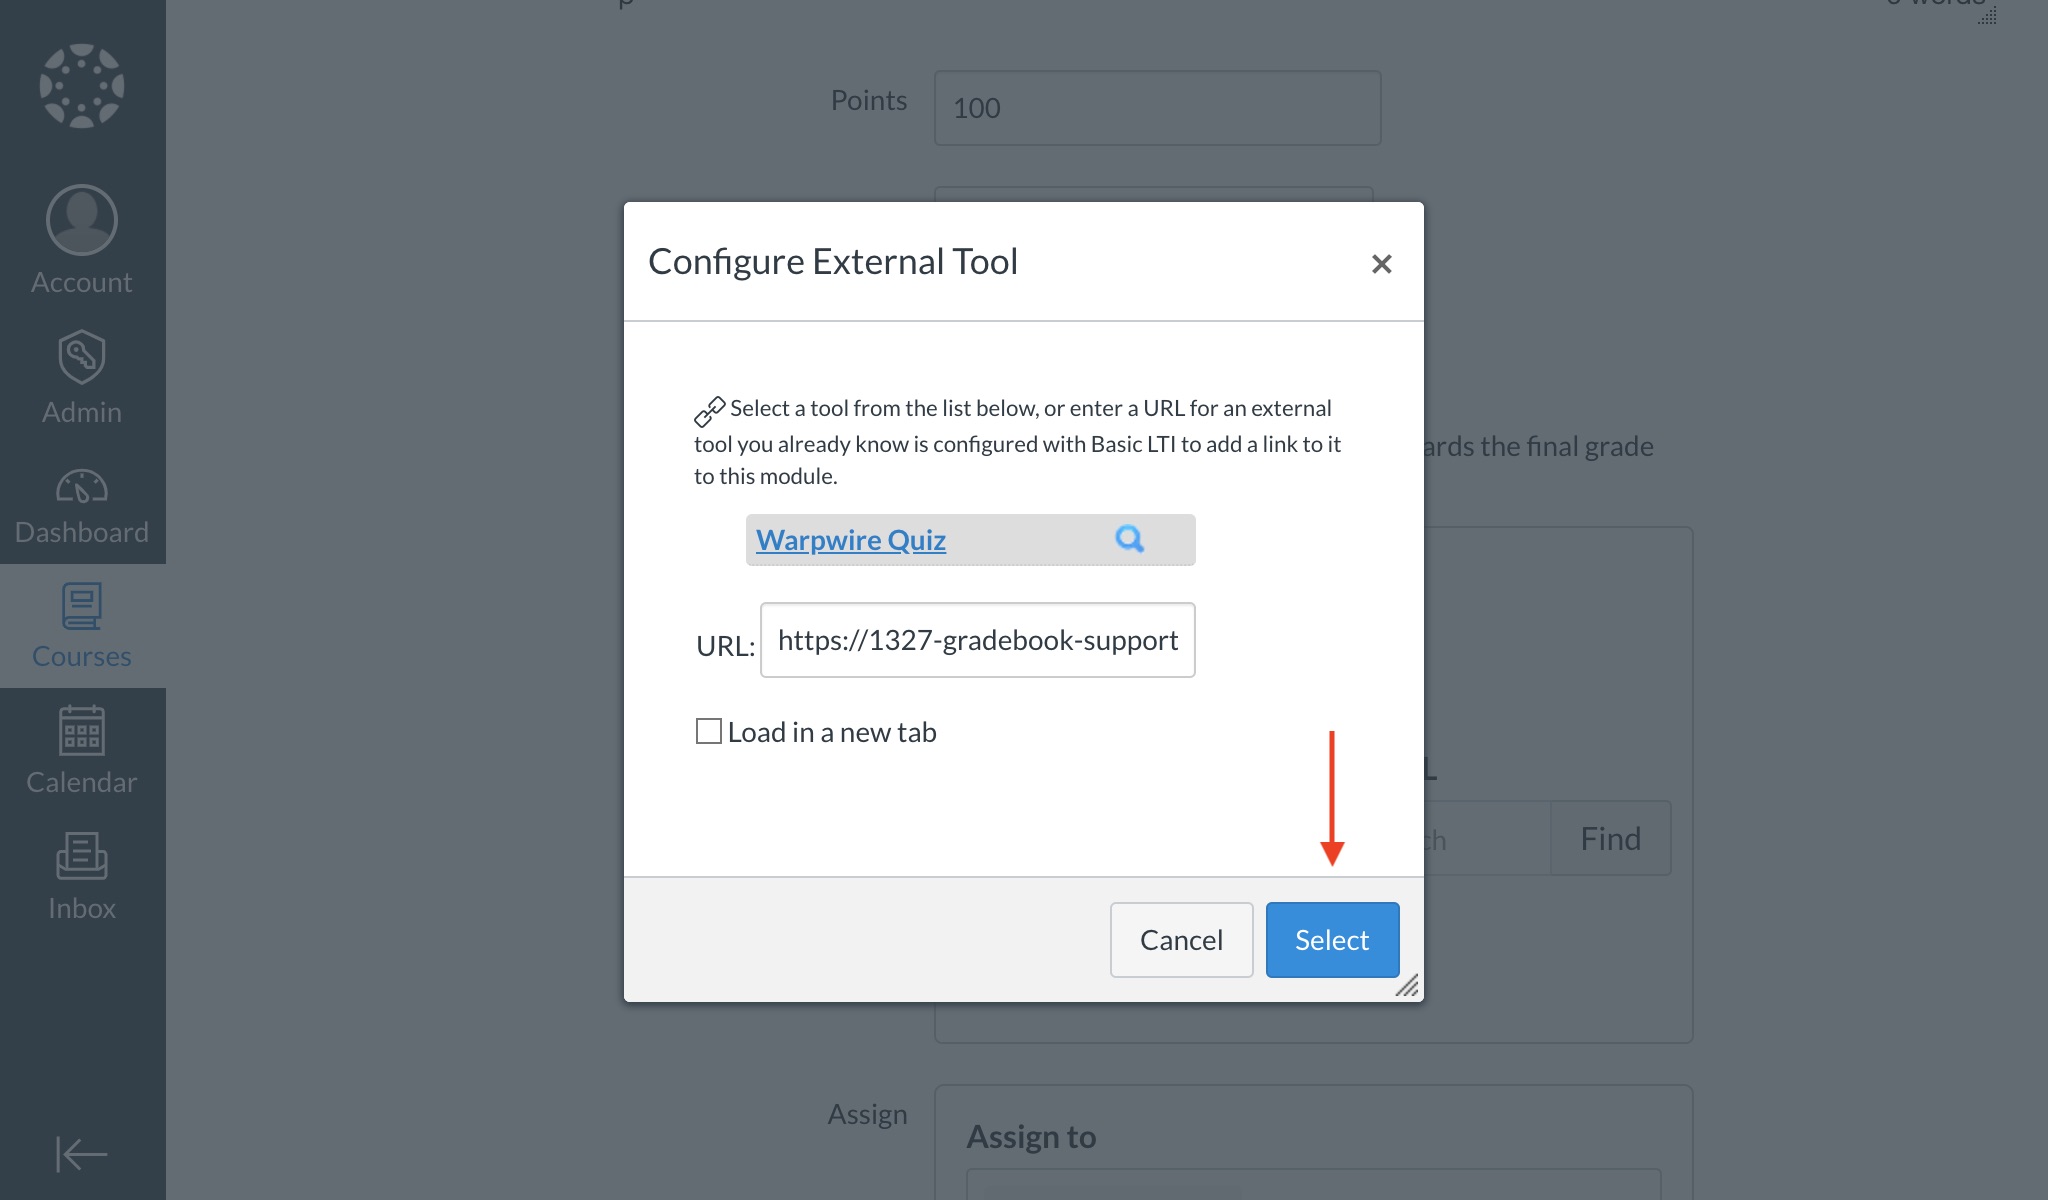 Click the blue Select button in the Configure External Tool window.